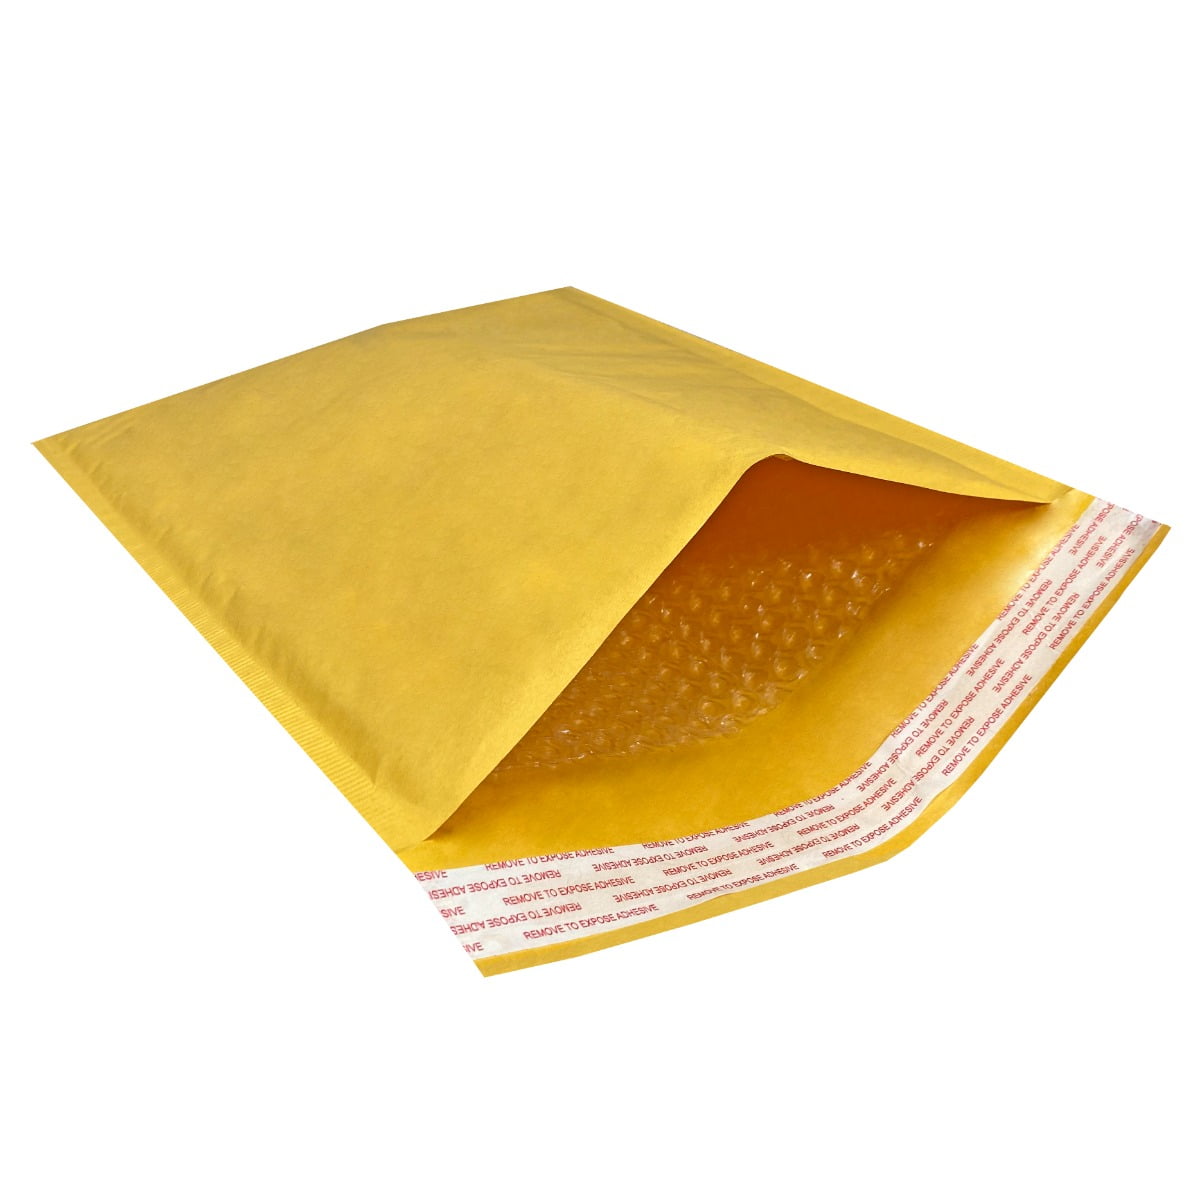 Mail Lite Bubble Wrap Padded Envelopes Postage Mailing Bags Small-Large GOLD 